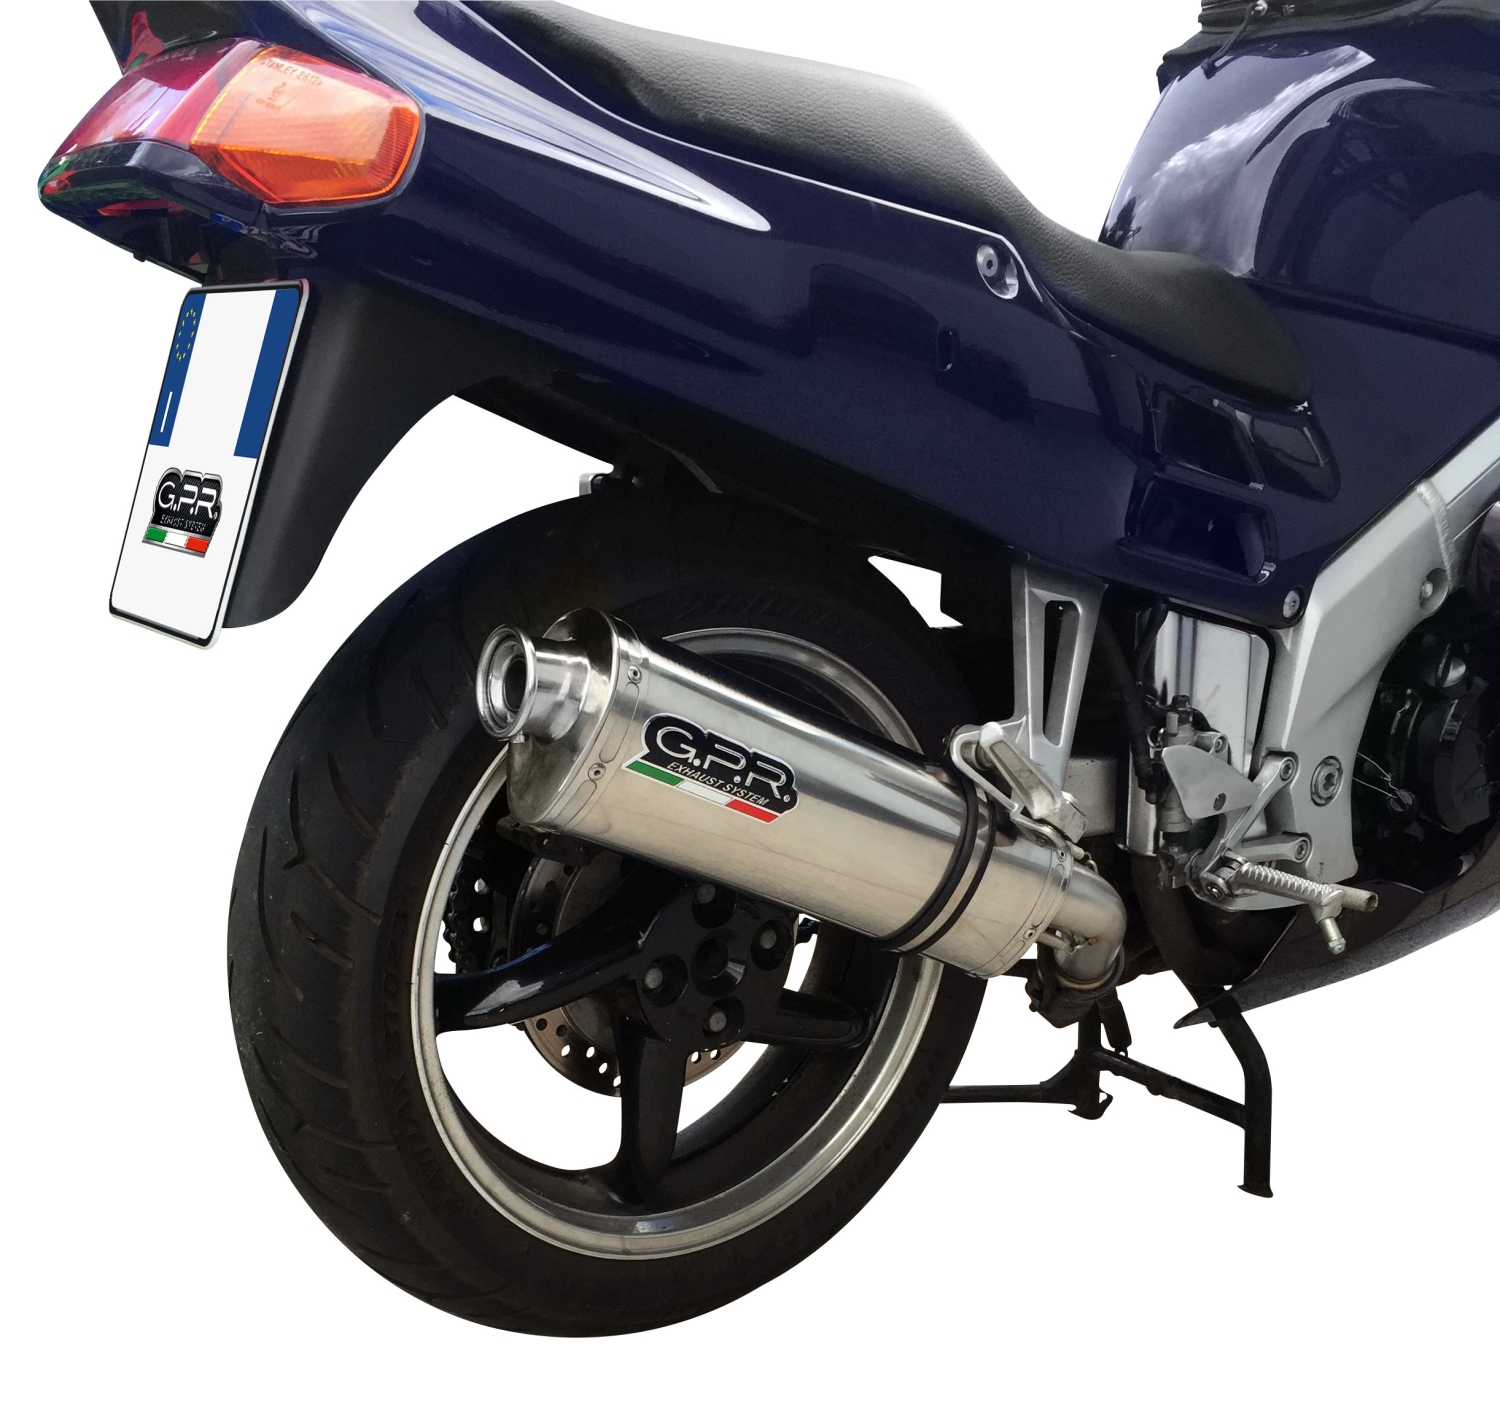 Exhaust system compatible with Honda Vfr 750 F 1994-1997, Trioval, Homologated legal slip-on exhaust including removable db killer and link pipe 